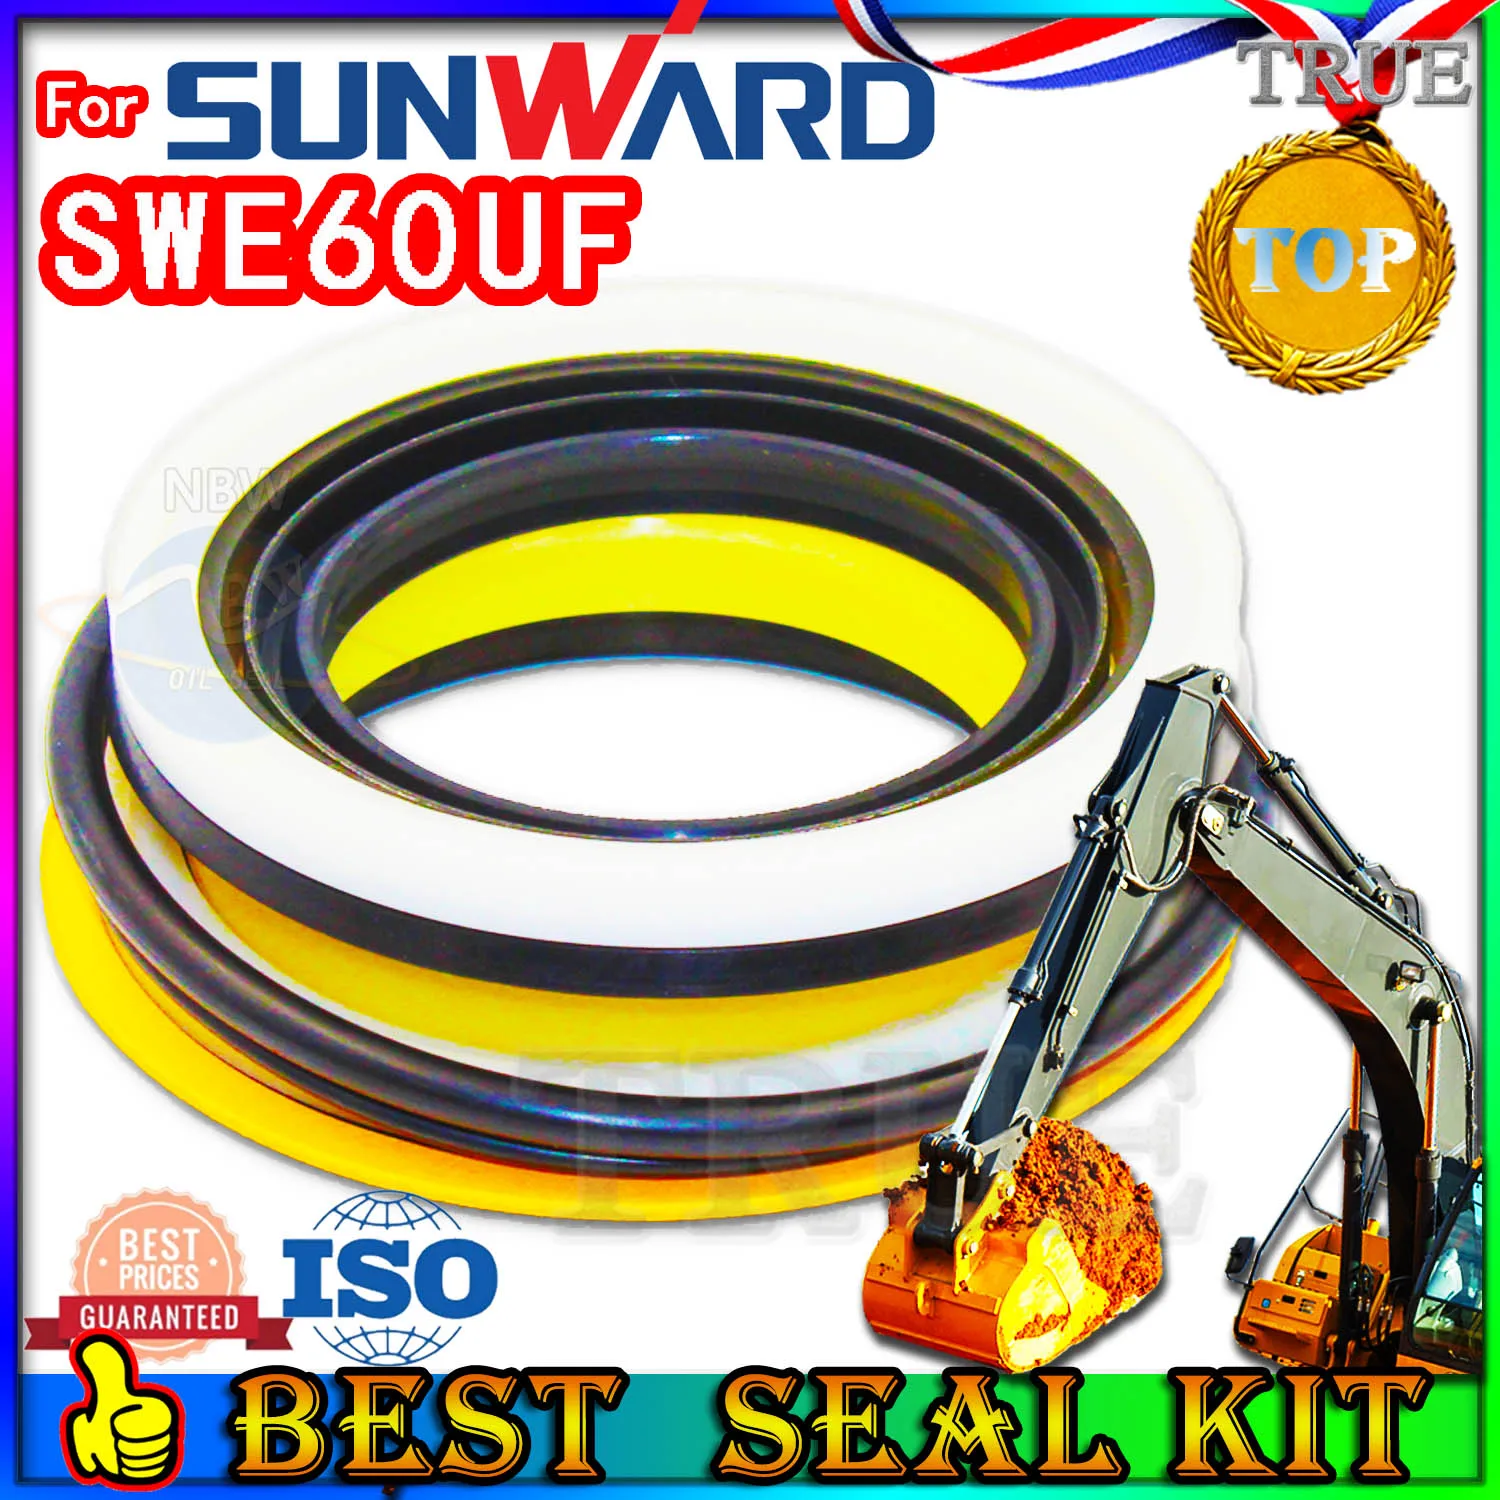 

For Sunward SWE60UF Oil Seal Repair Kit Boom Arm Bucket Excavator Hydraulic Cylinder Fix Best Reliable Mend proof Center Swivel